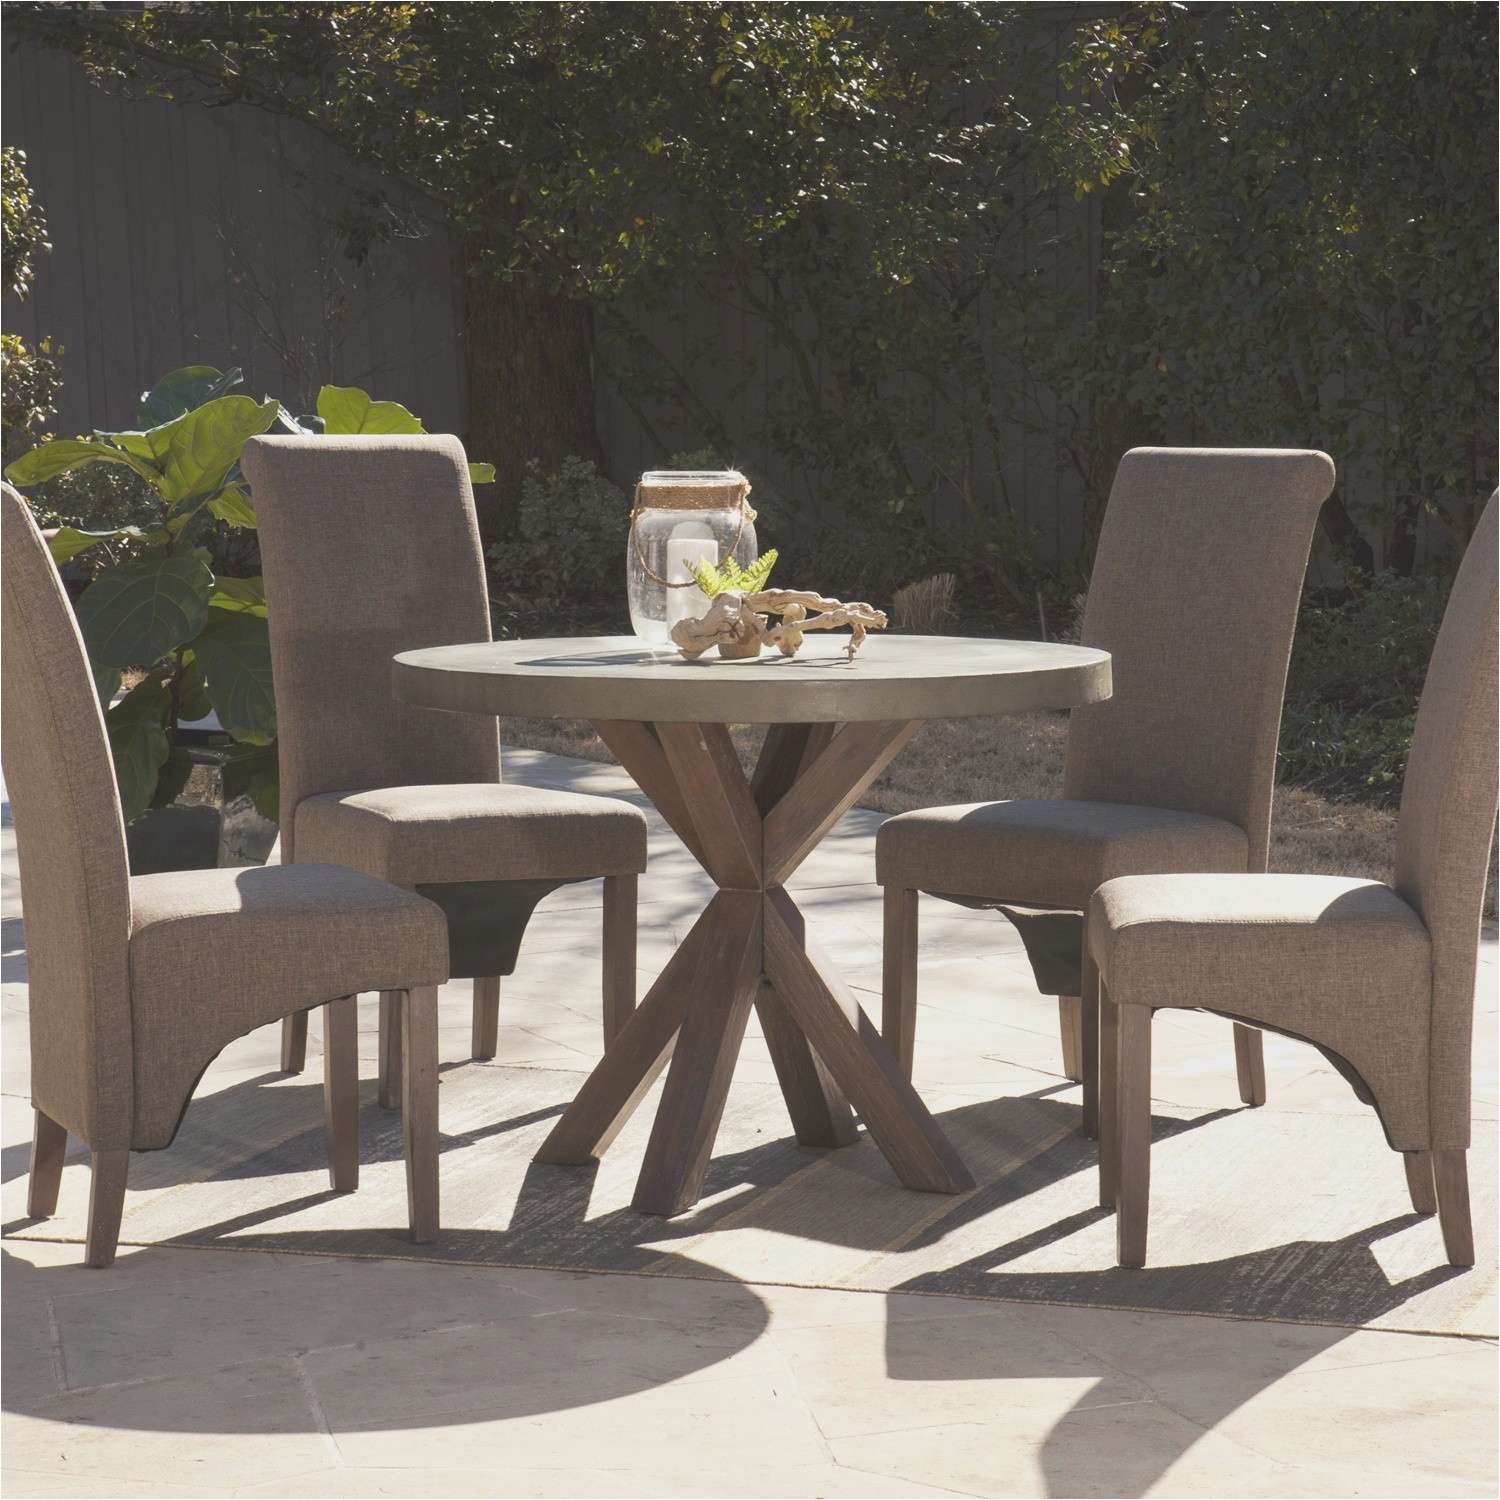 outdoor table and chairs best wicker outdoor sofa 0d patio chairs